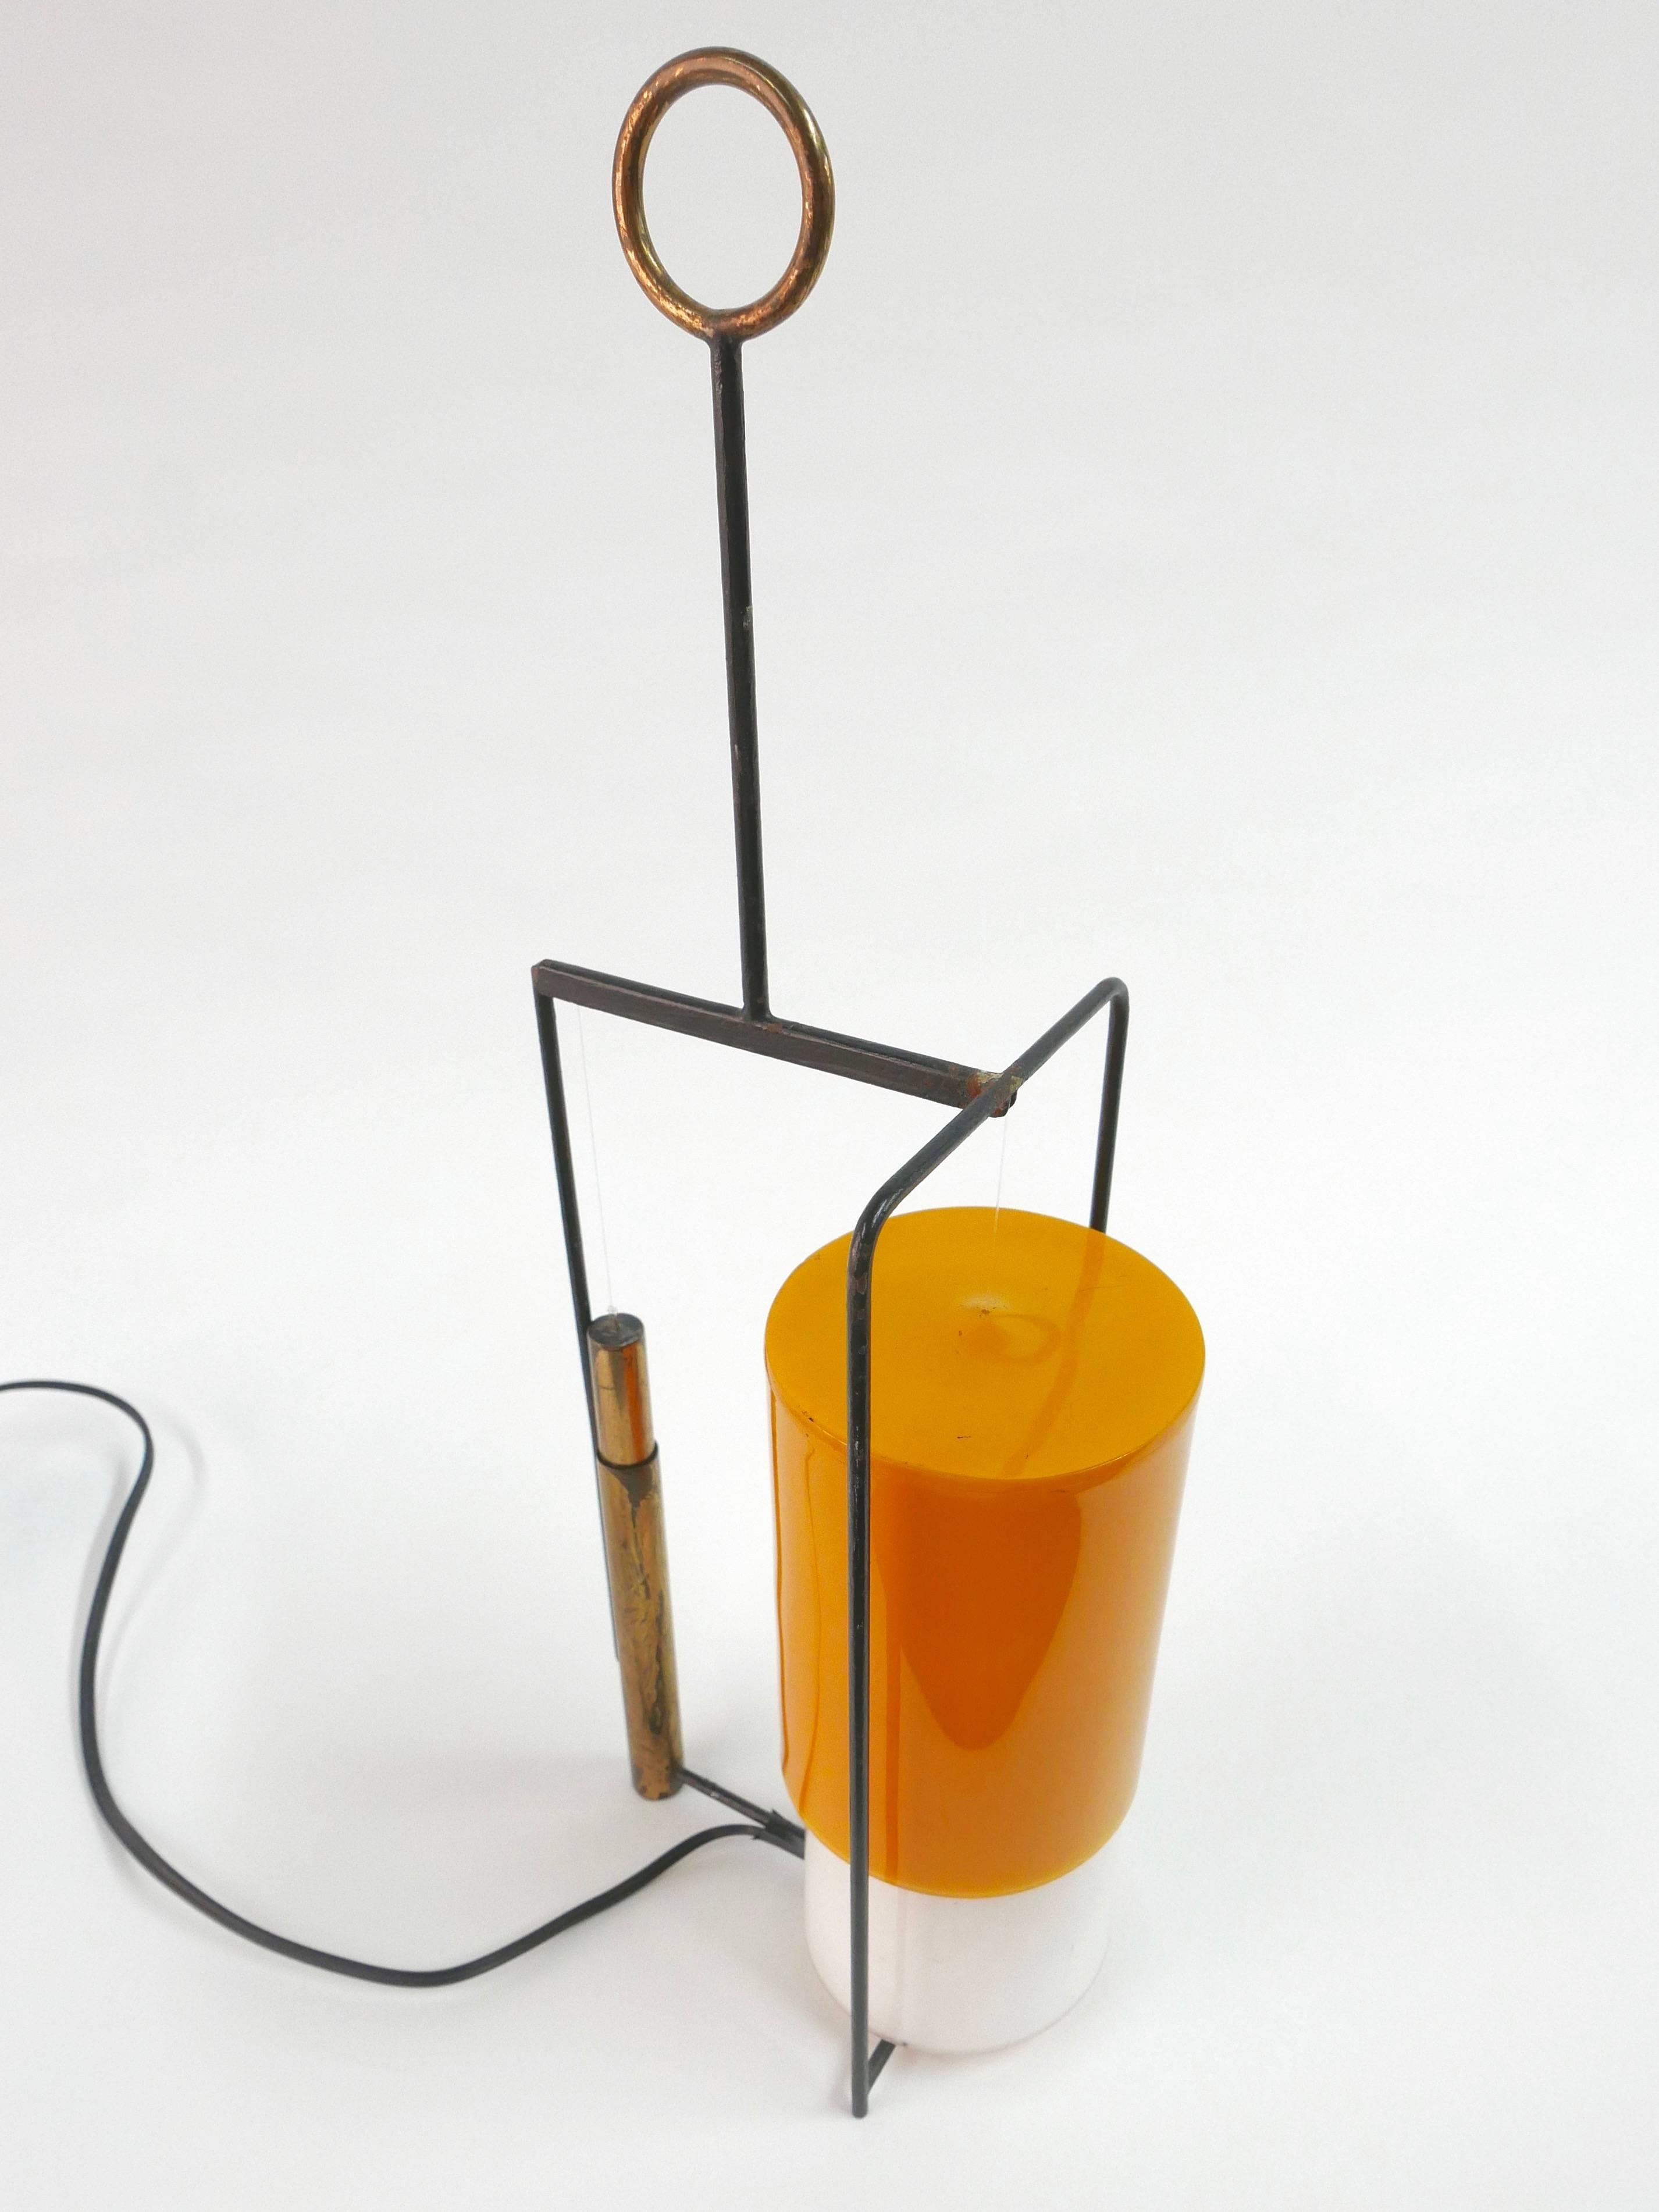 Arredoluce table lamp designed by Angelo Lelli in 1955.
The Yellow Perspex shade is counterbalanced by a brass counterweight and adjusts up and down.
 